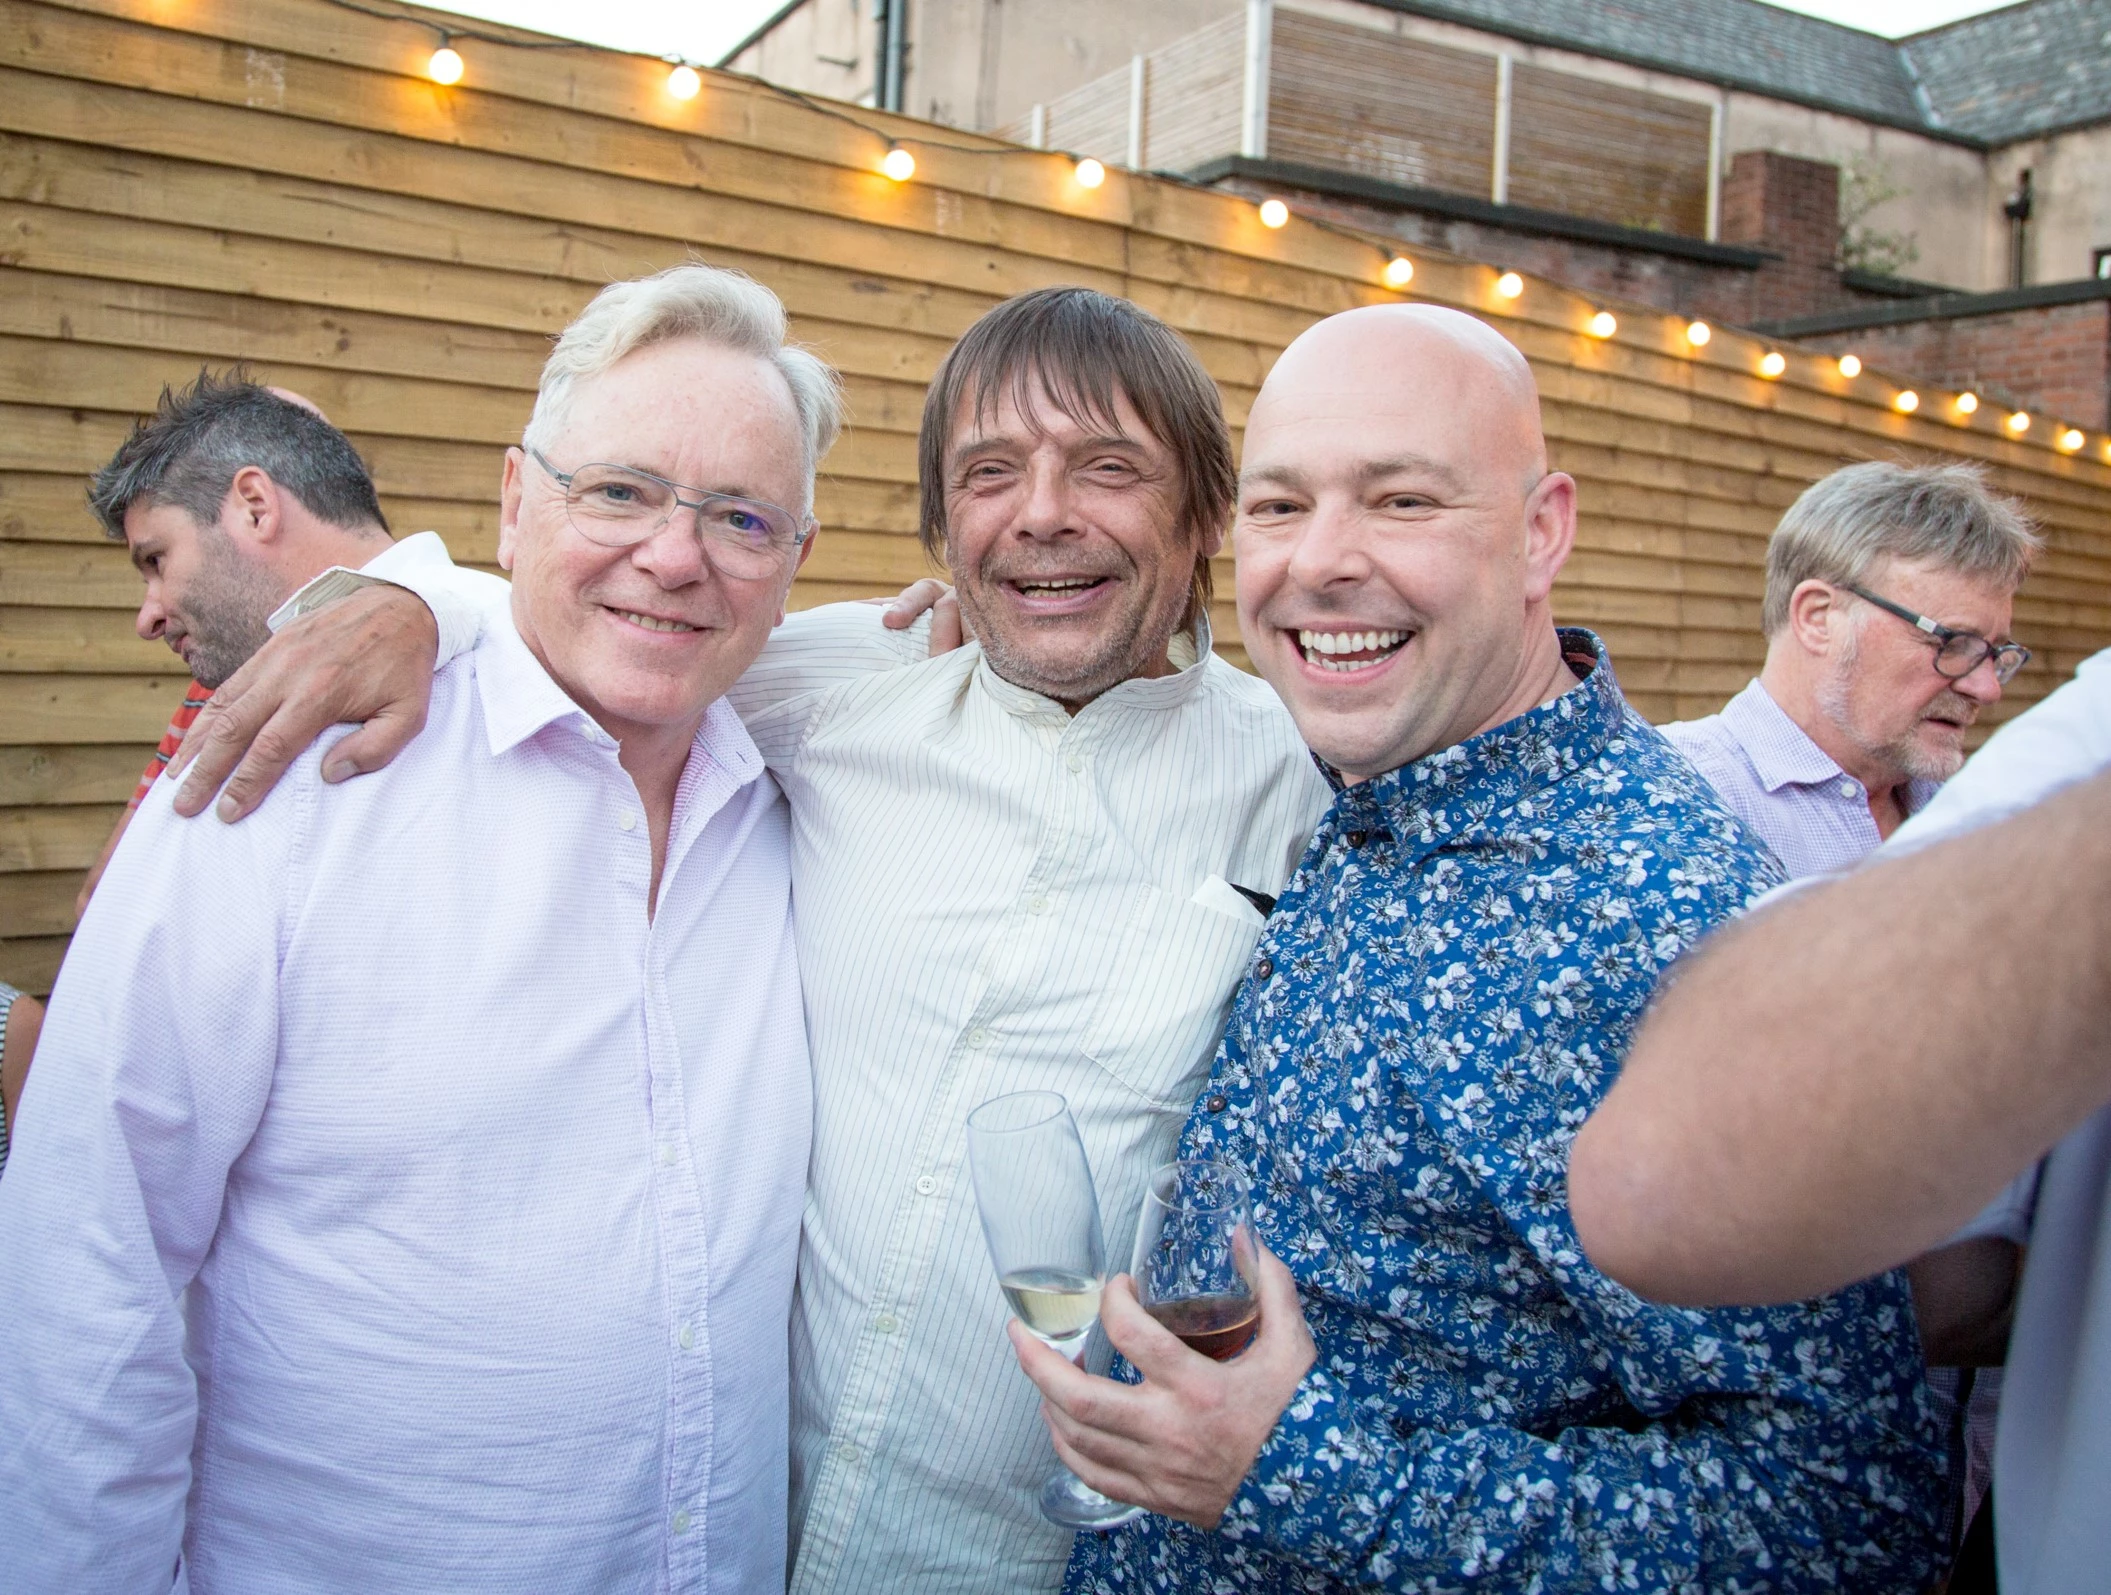 Bernard Sumner, Mani and Cork of the North owner Marc Hough, celebrate the opening of a new outlet in Heaton Moor.